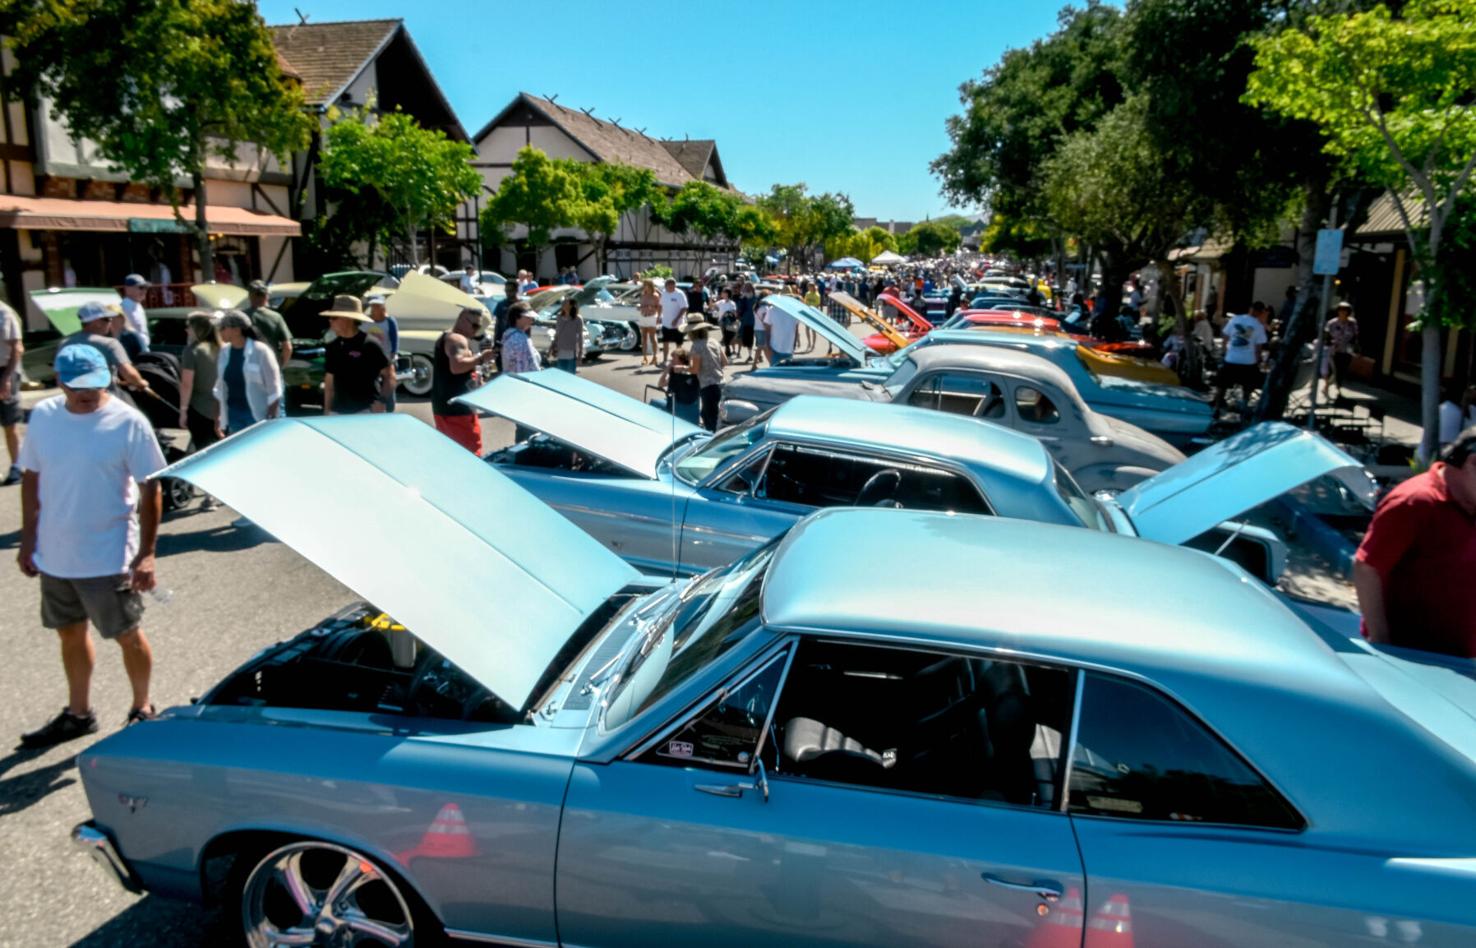 Vikings of Solvang start new classic car show to fill void left by